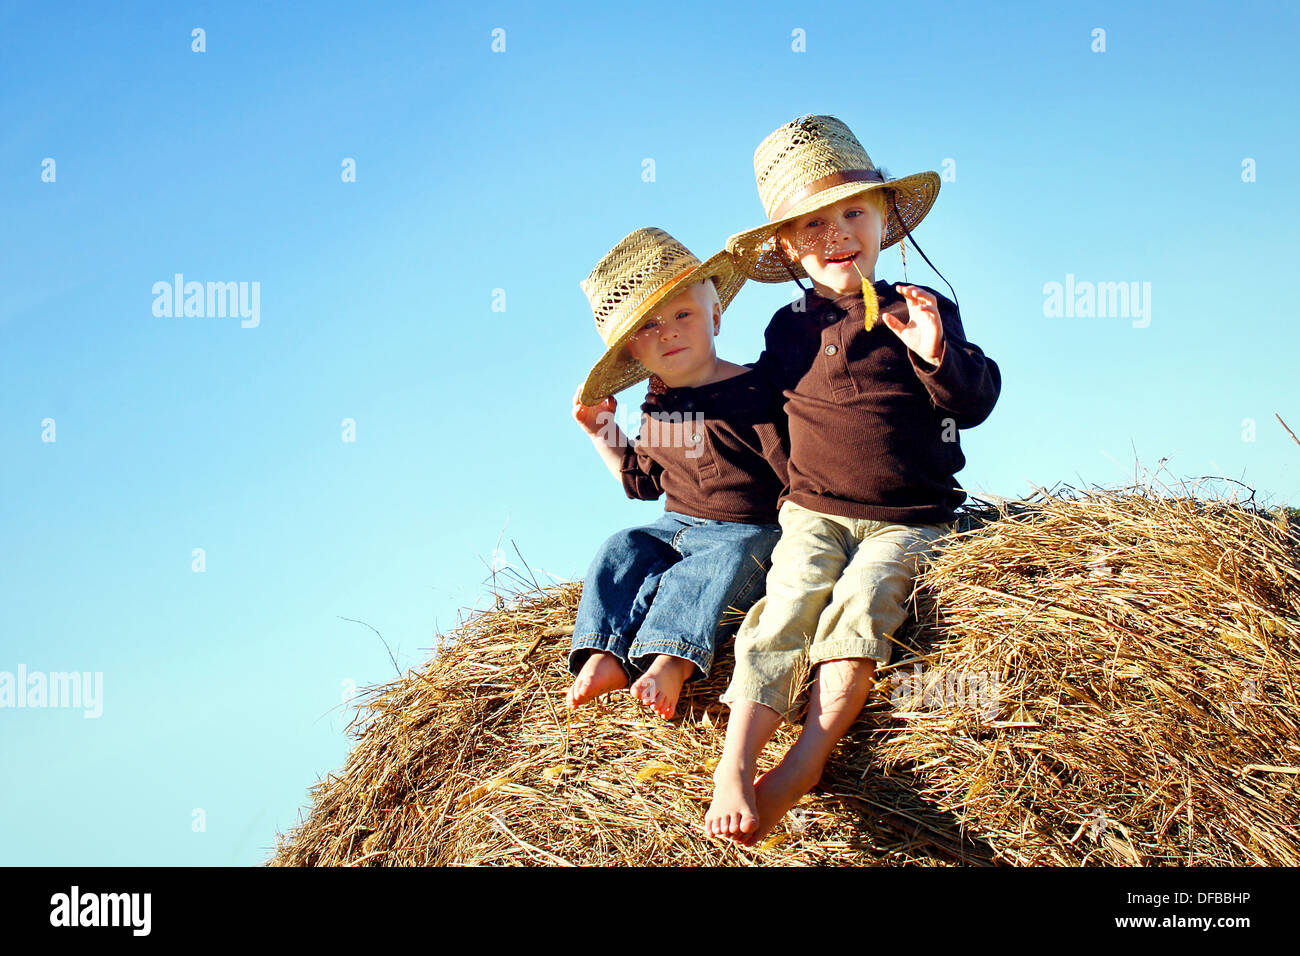 Two children, a young boy and his baby brother are sitting outside on hay bales, wearing straw hats on a sunny Autumn day. Stock Photo